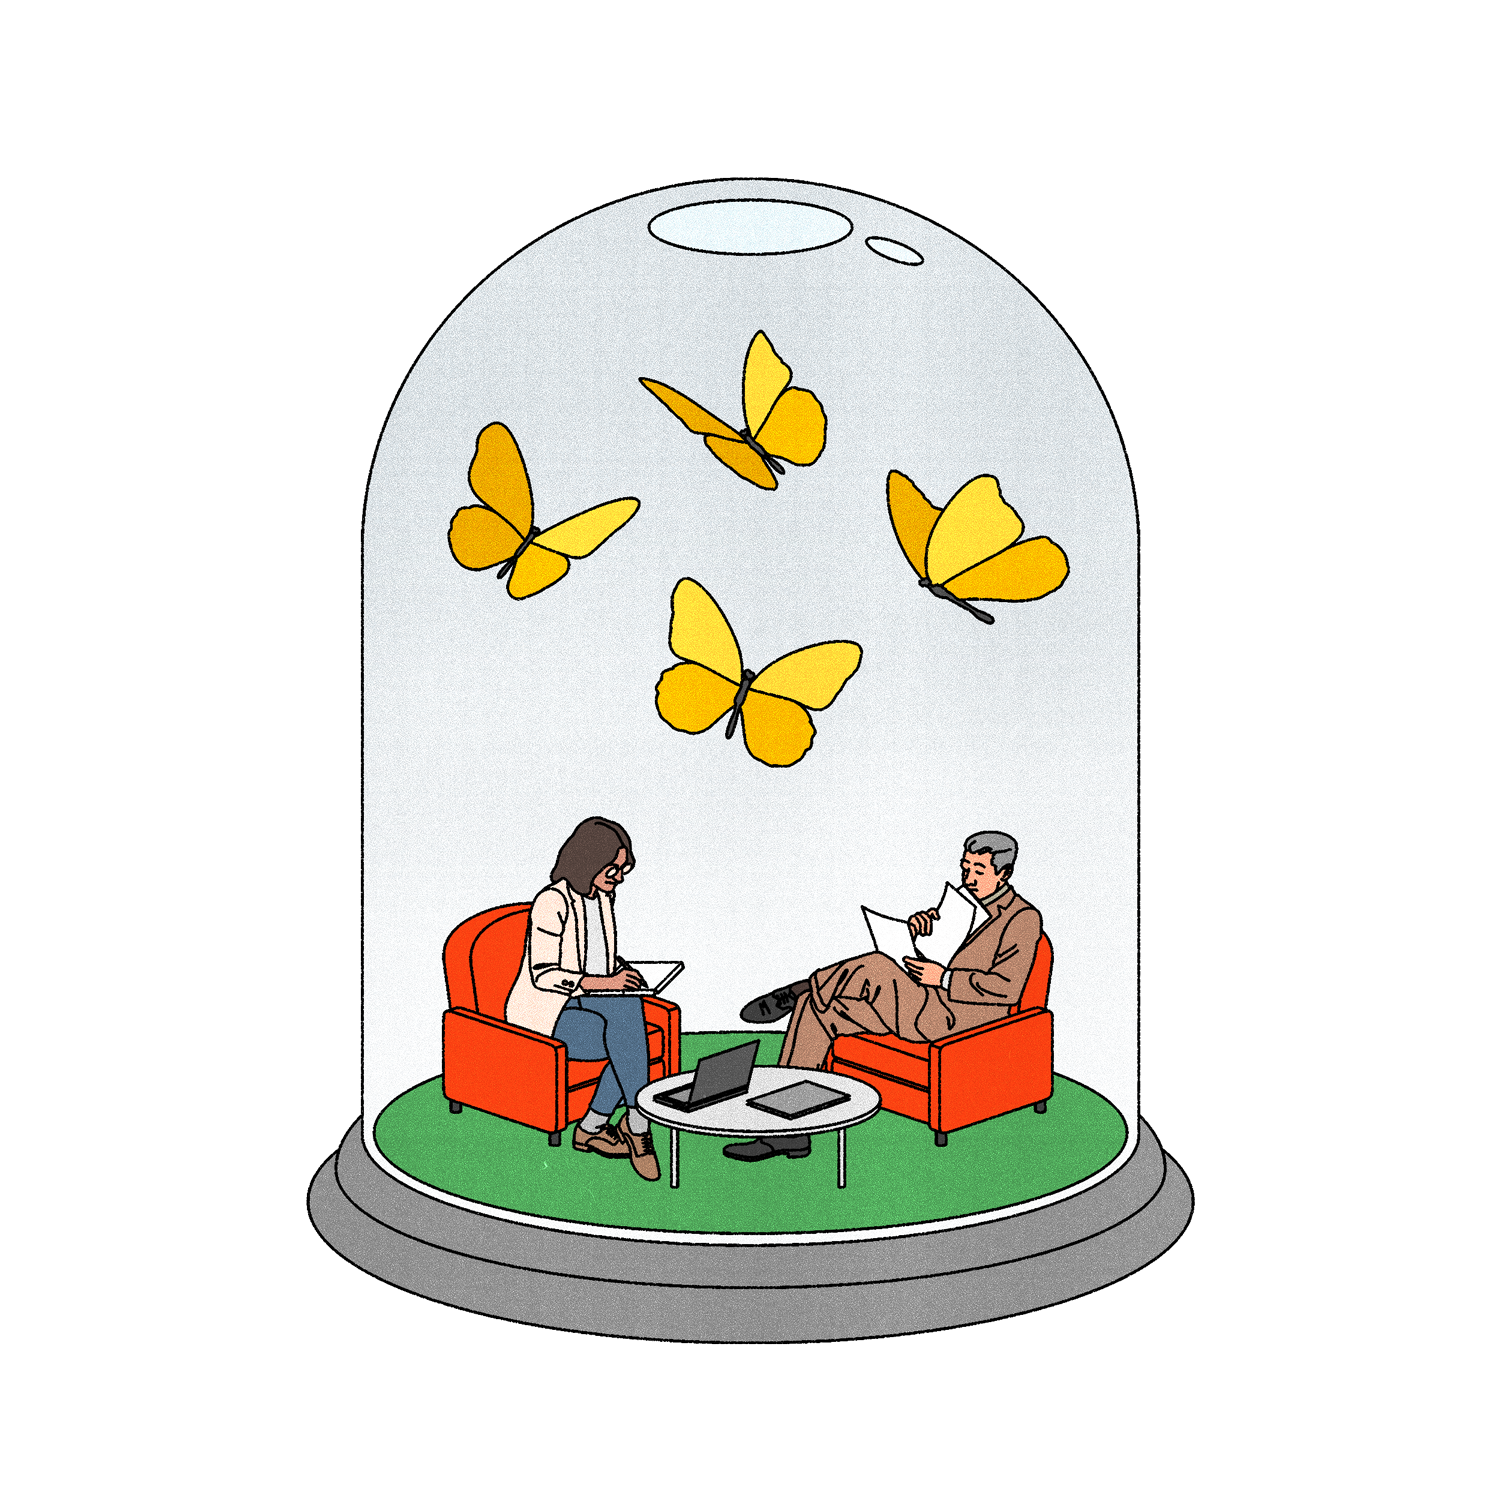 People working from a quiet peaceful jar filled with butterflies